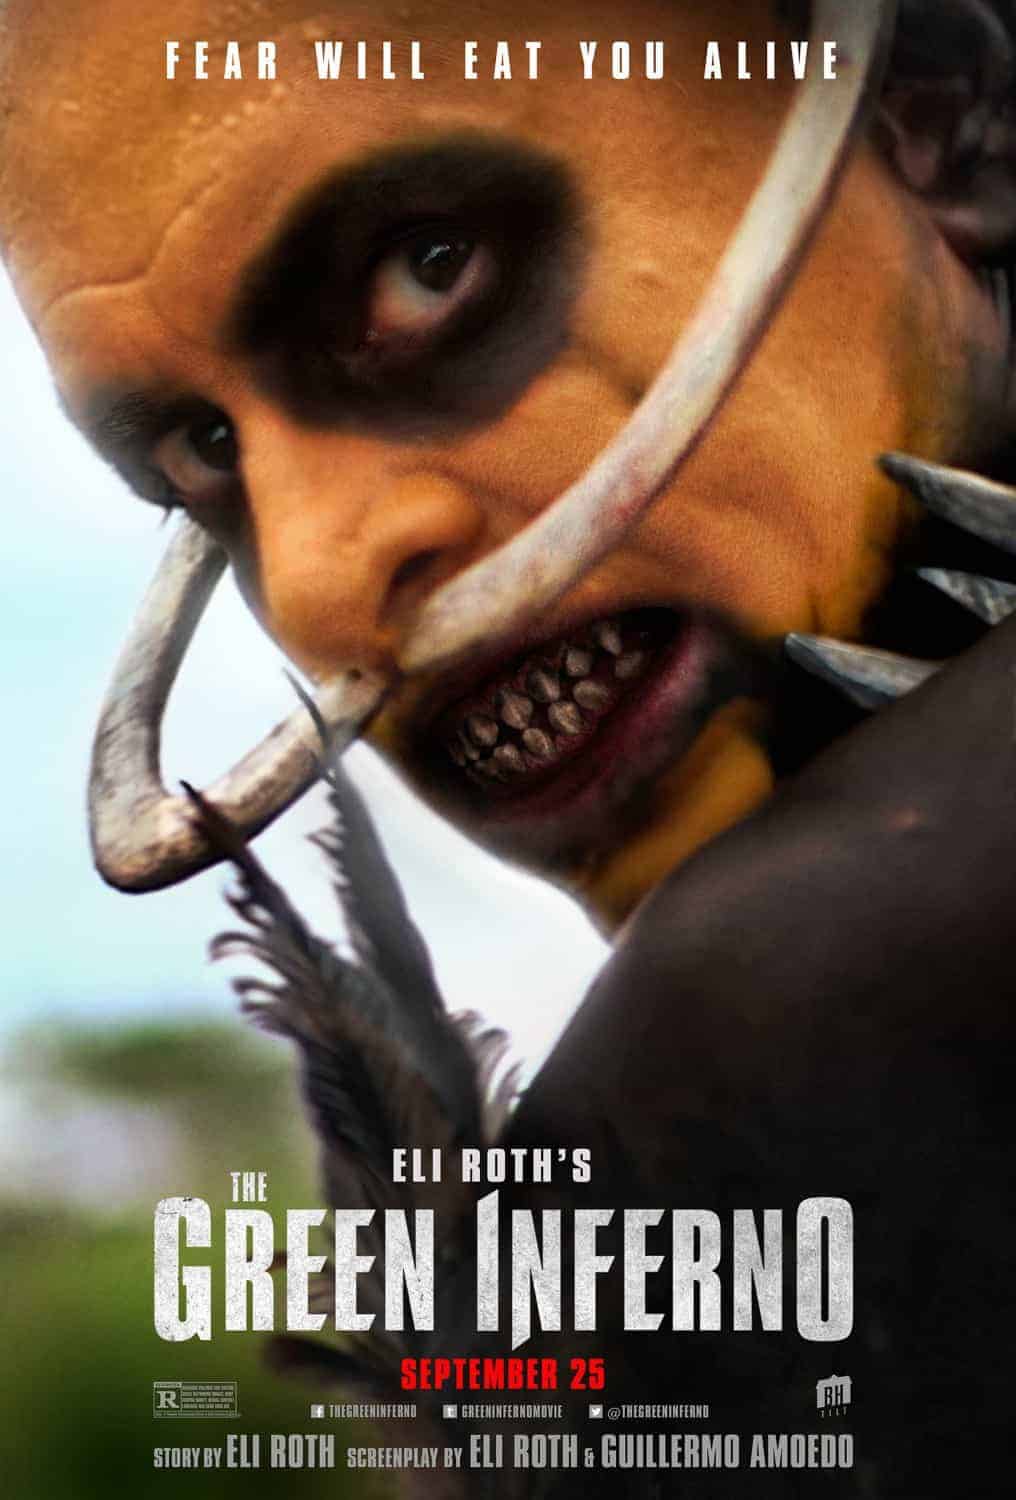 The Green Inferno 2015 Tamil Dubbed Horror Movie Online